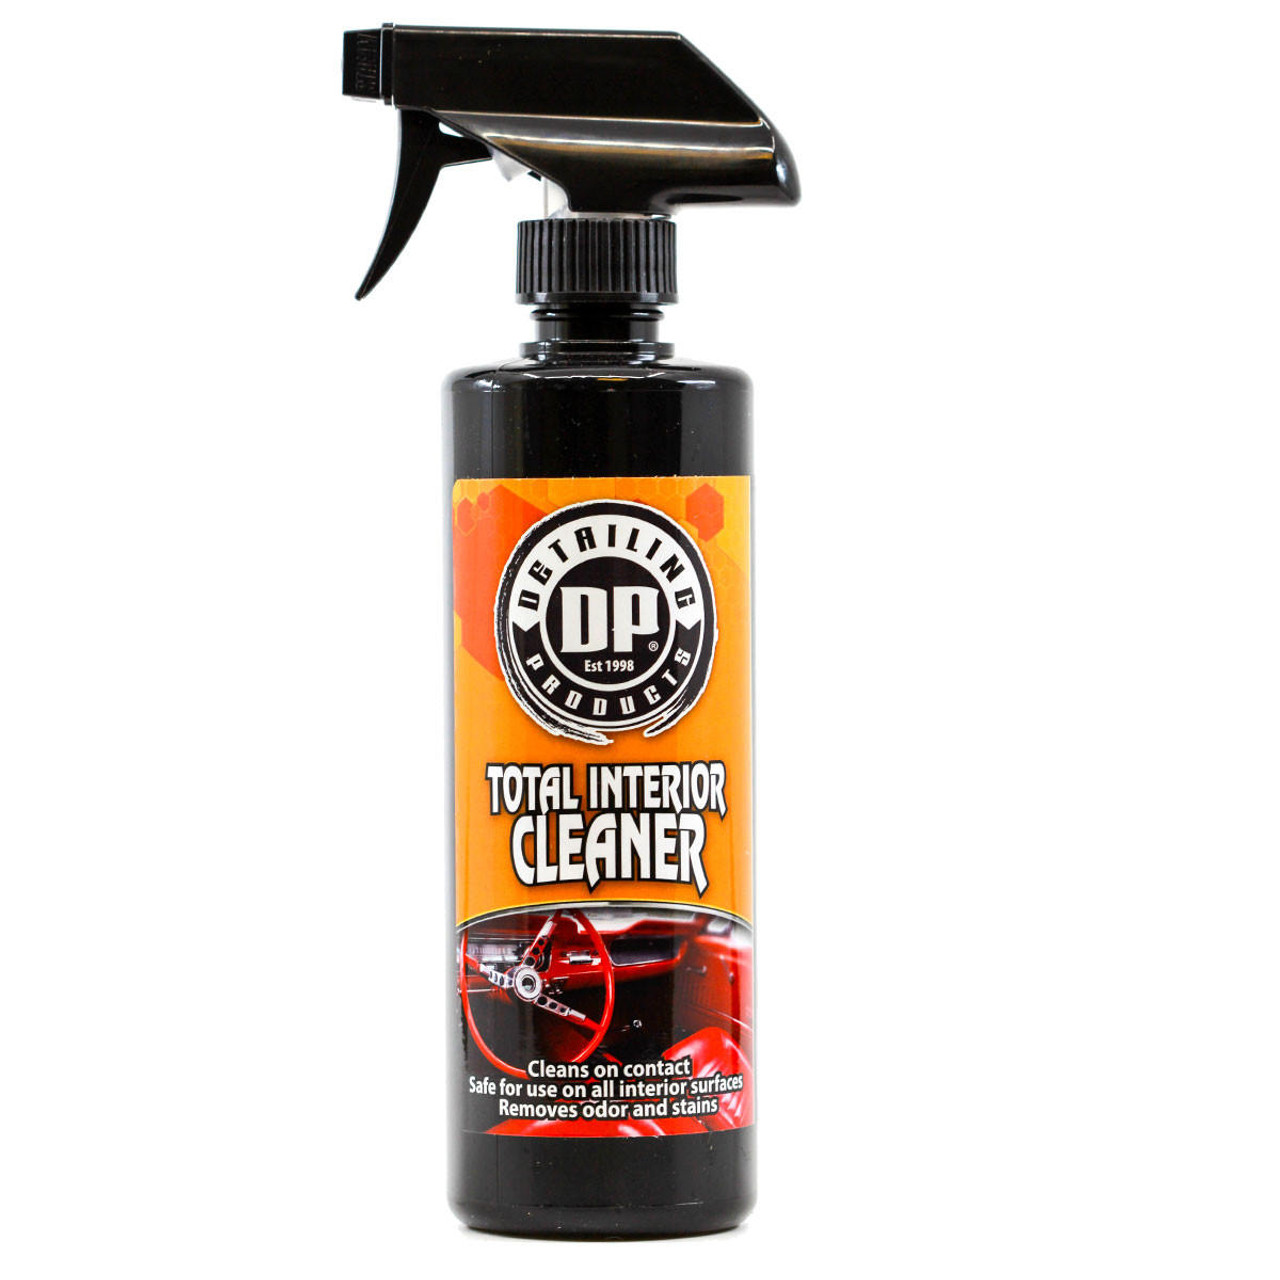 DP Total Interior Cleaner cleans plastic, vinyl, leather, carpet, and  upholstery without harsh solvents or caustic chemicals.